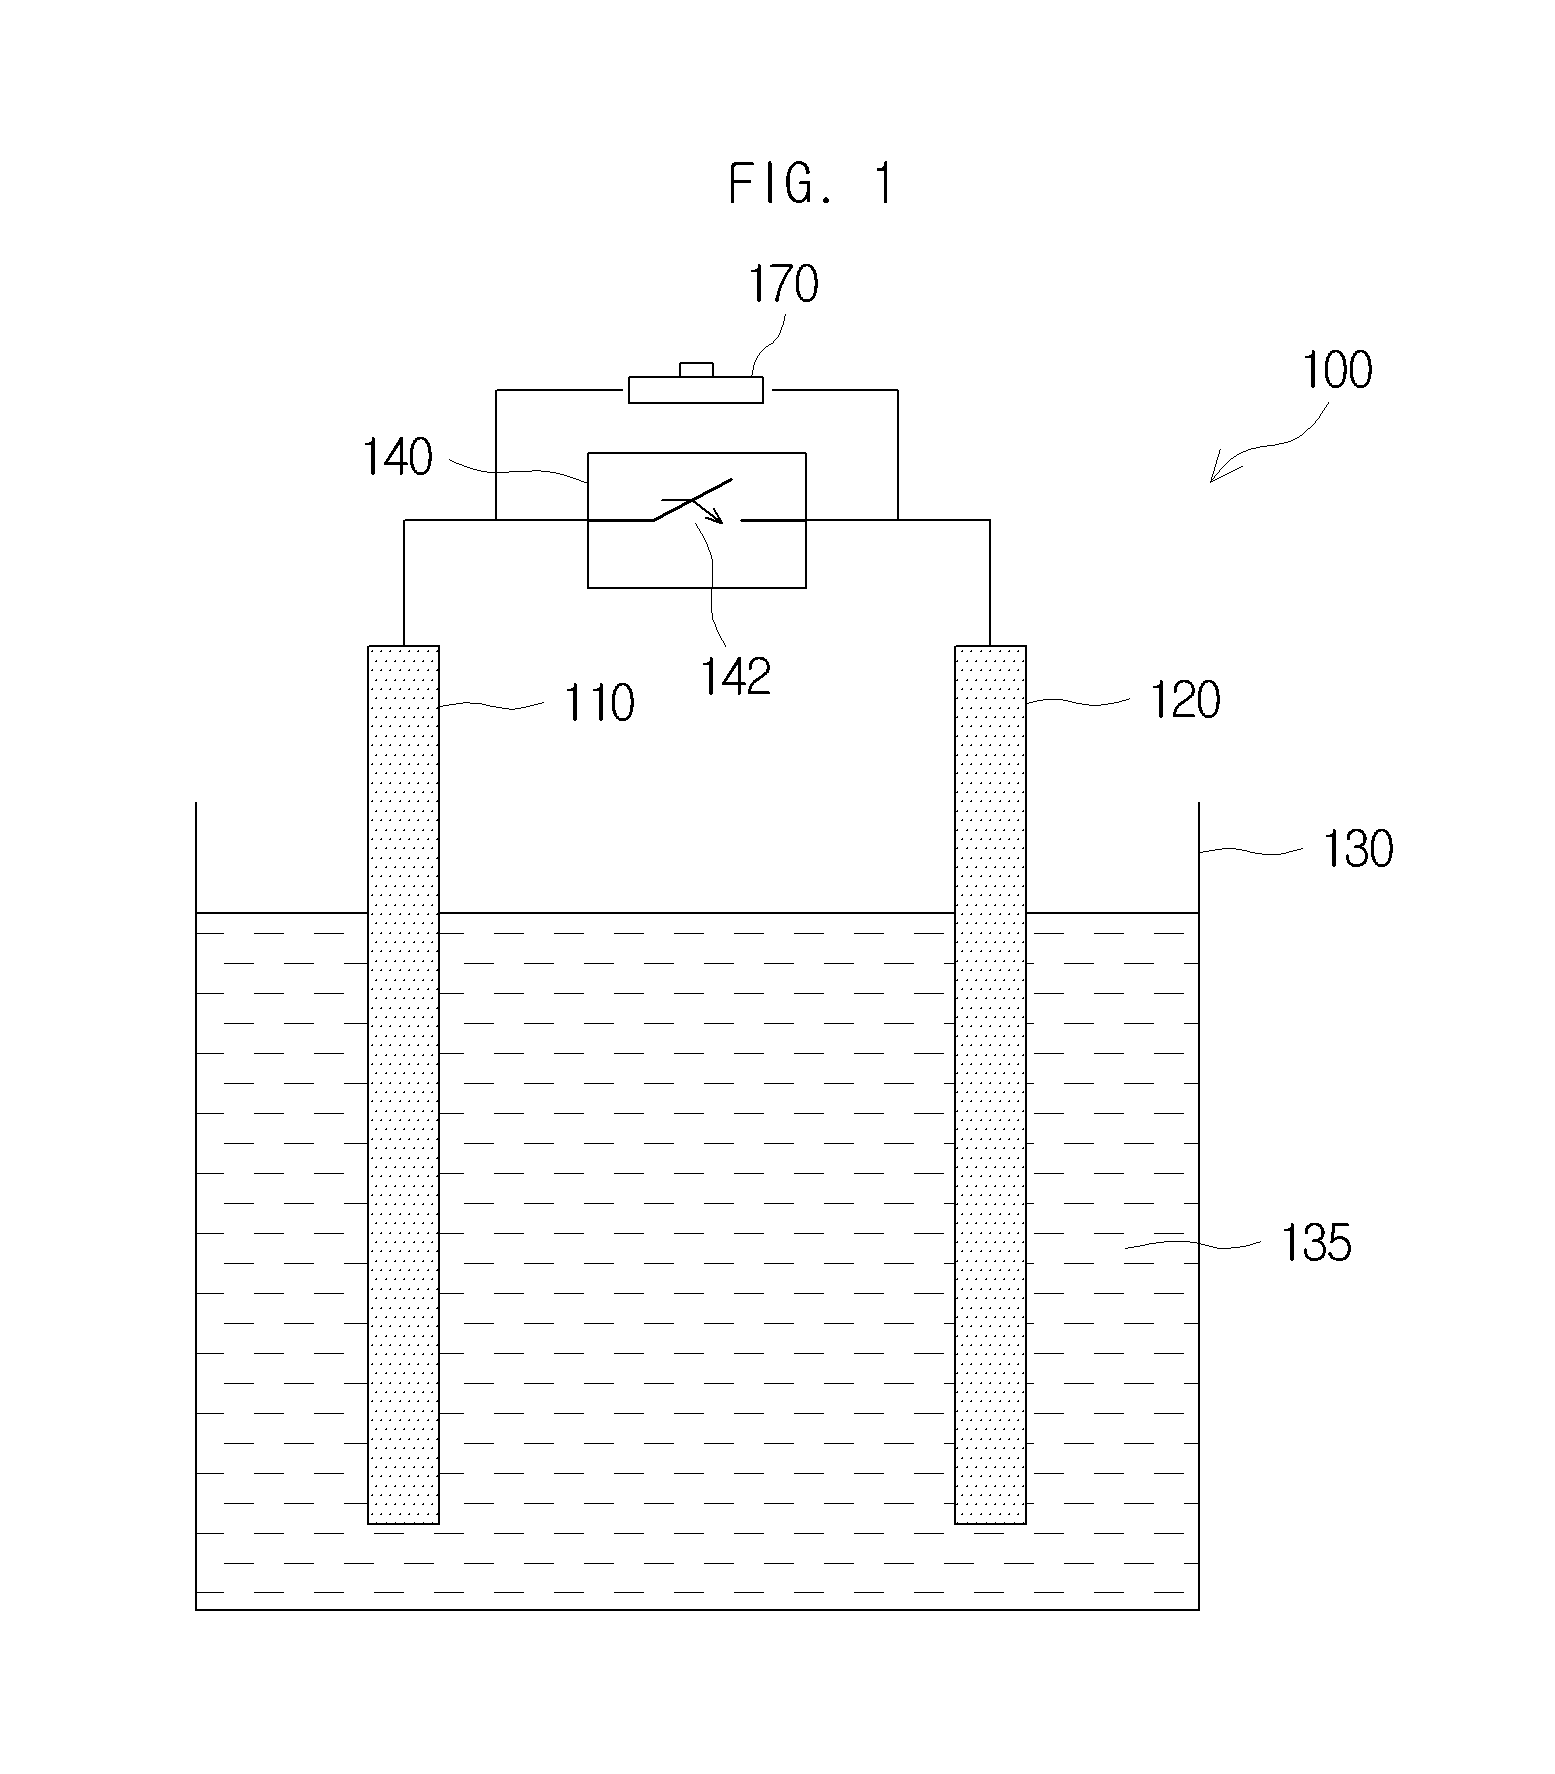 Method for generating hydrogen by using a fuel cell power generation system